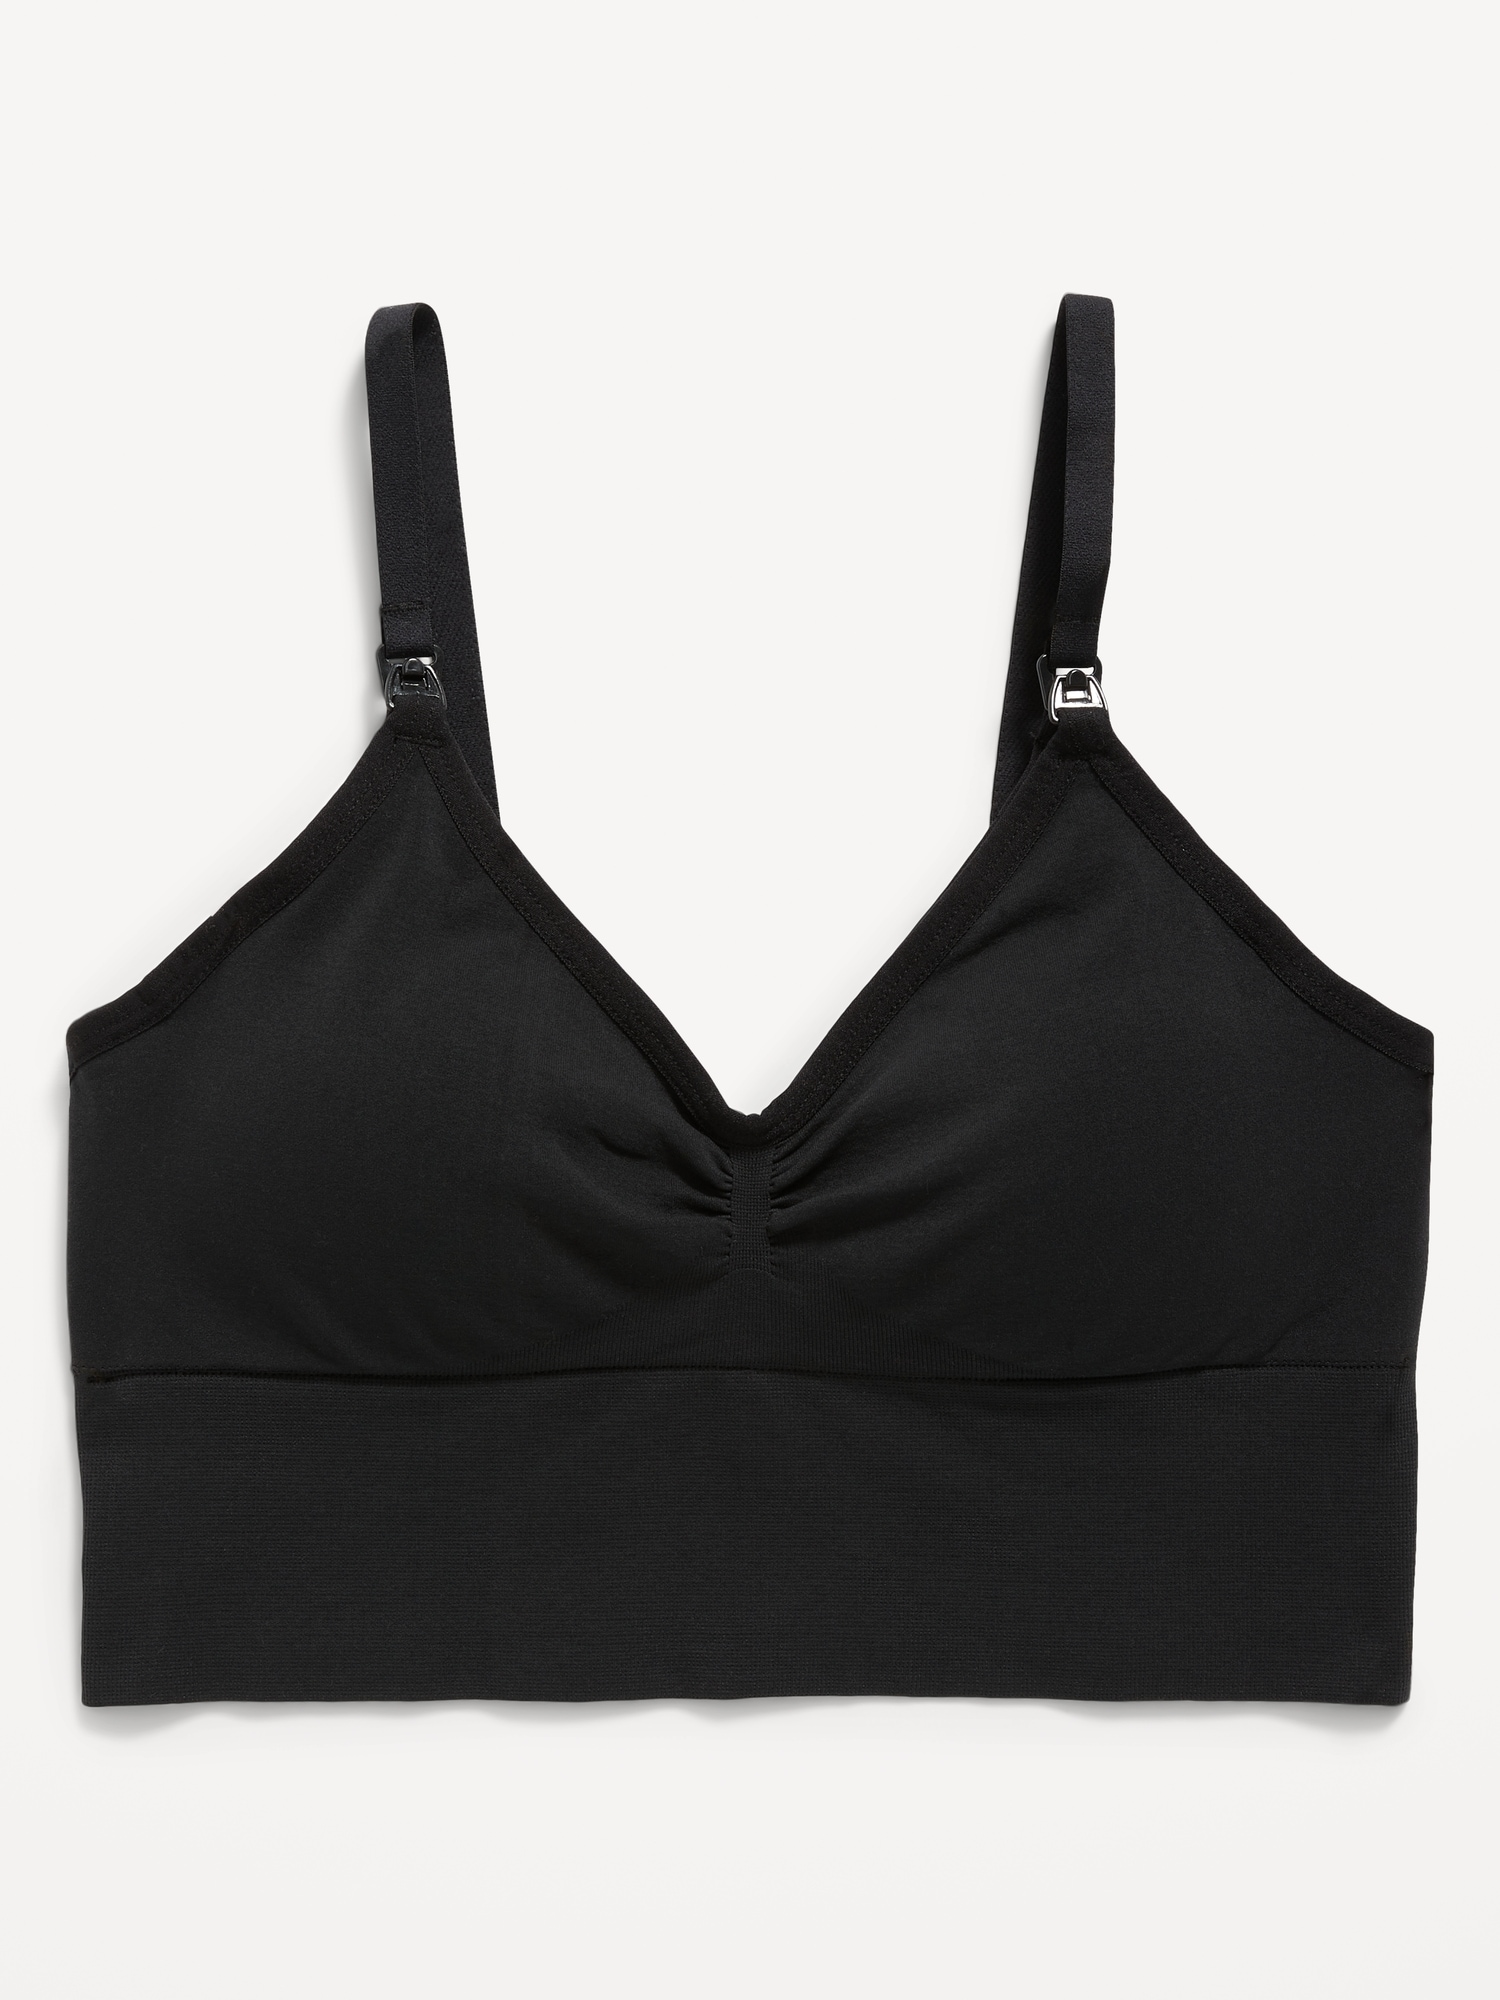 4HOW Hands-Free Pumping Bra Great Support Sports Bra Nursing and